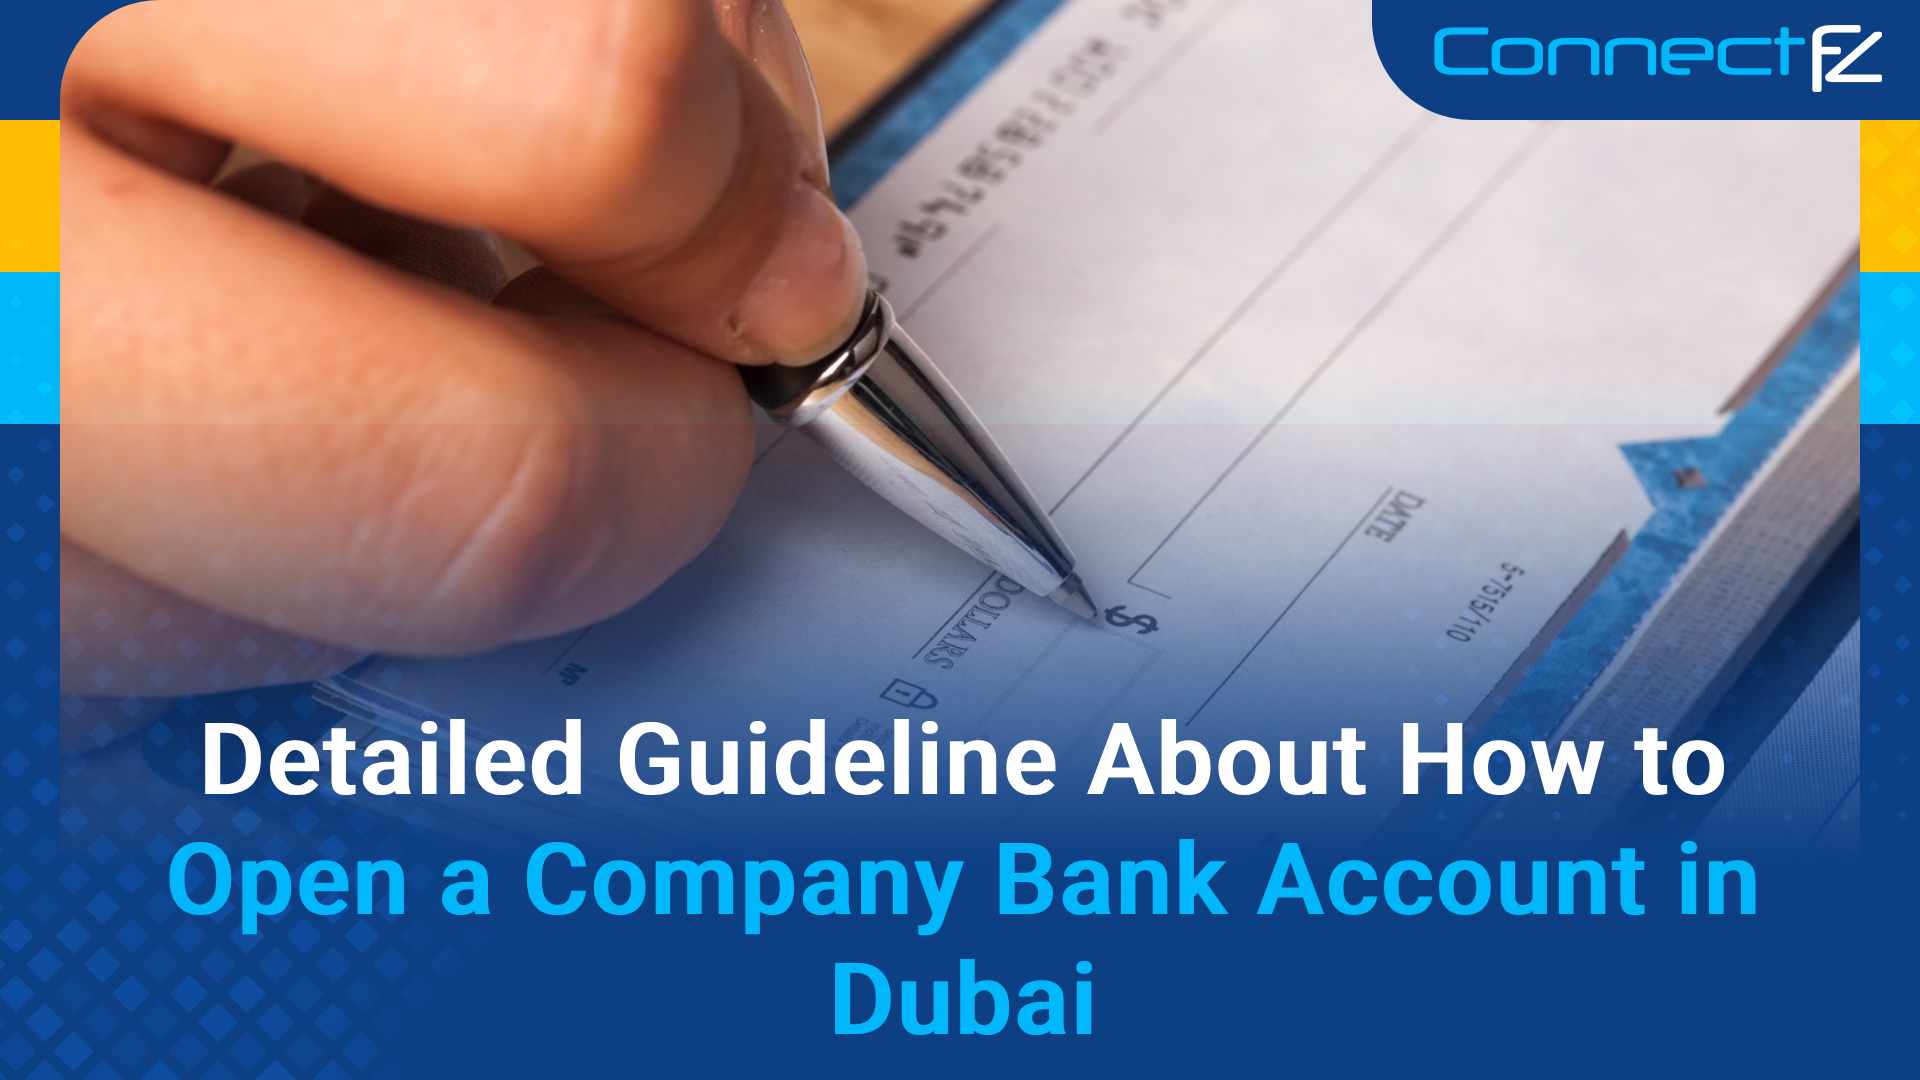 Detailed Guideline About How to Open a Company Bank Account in Dubai